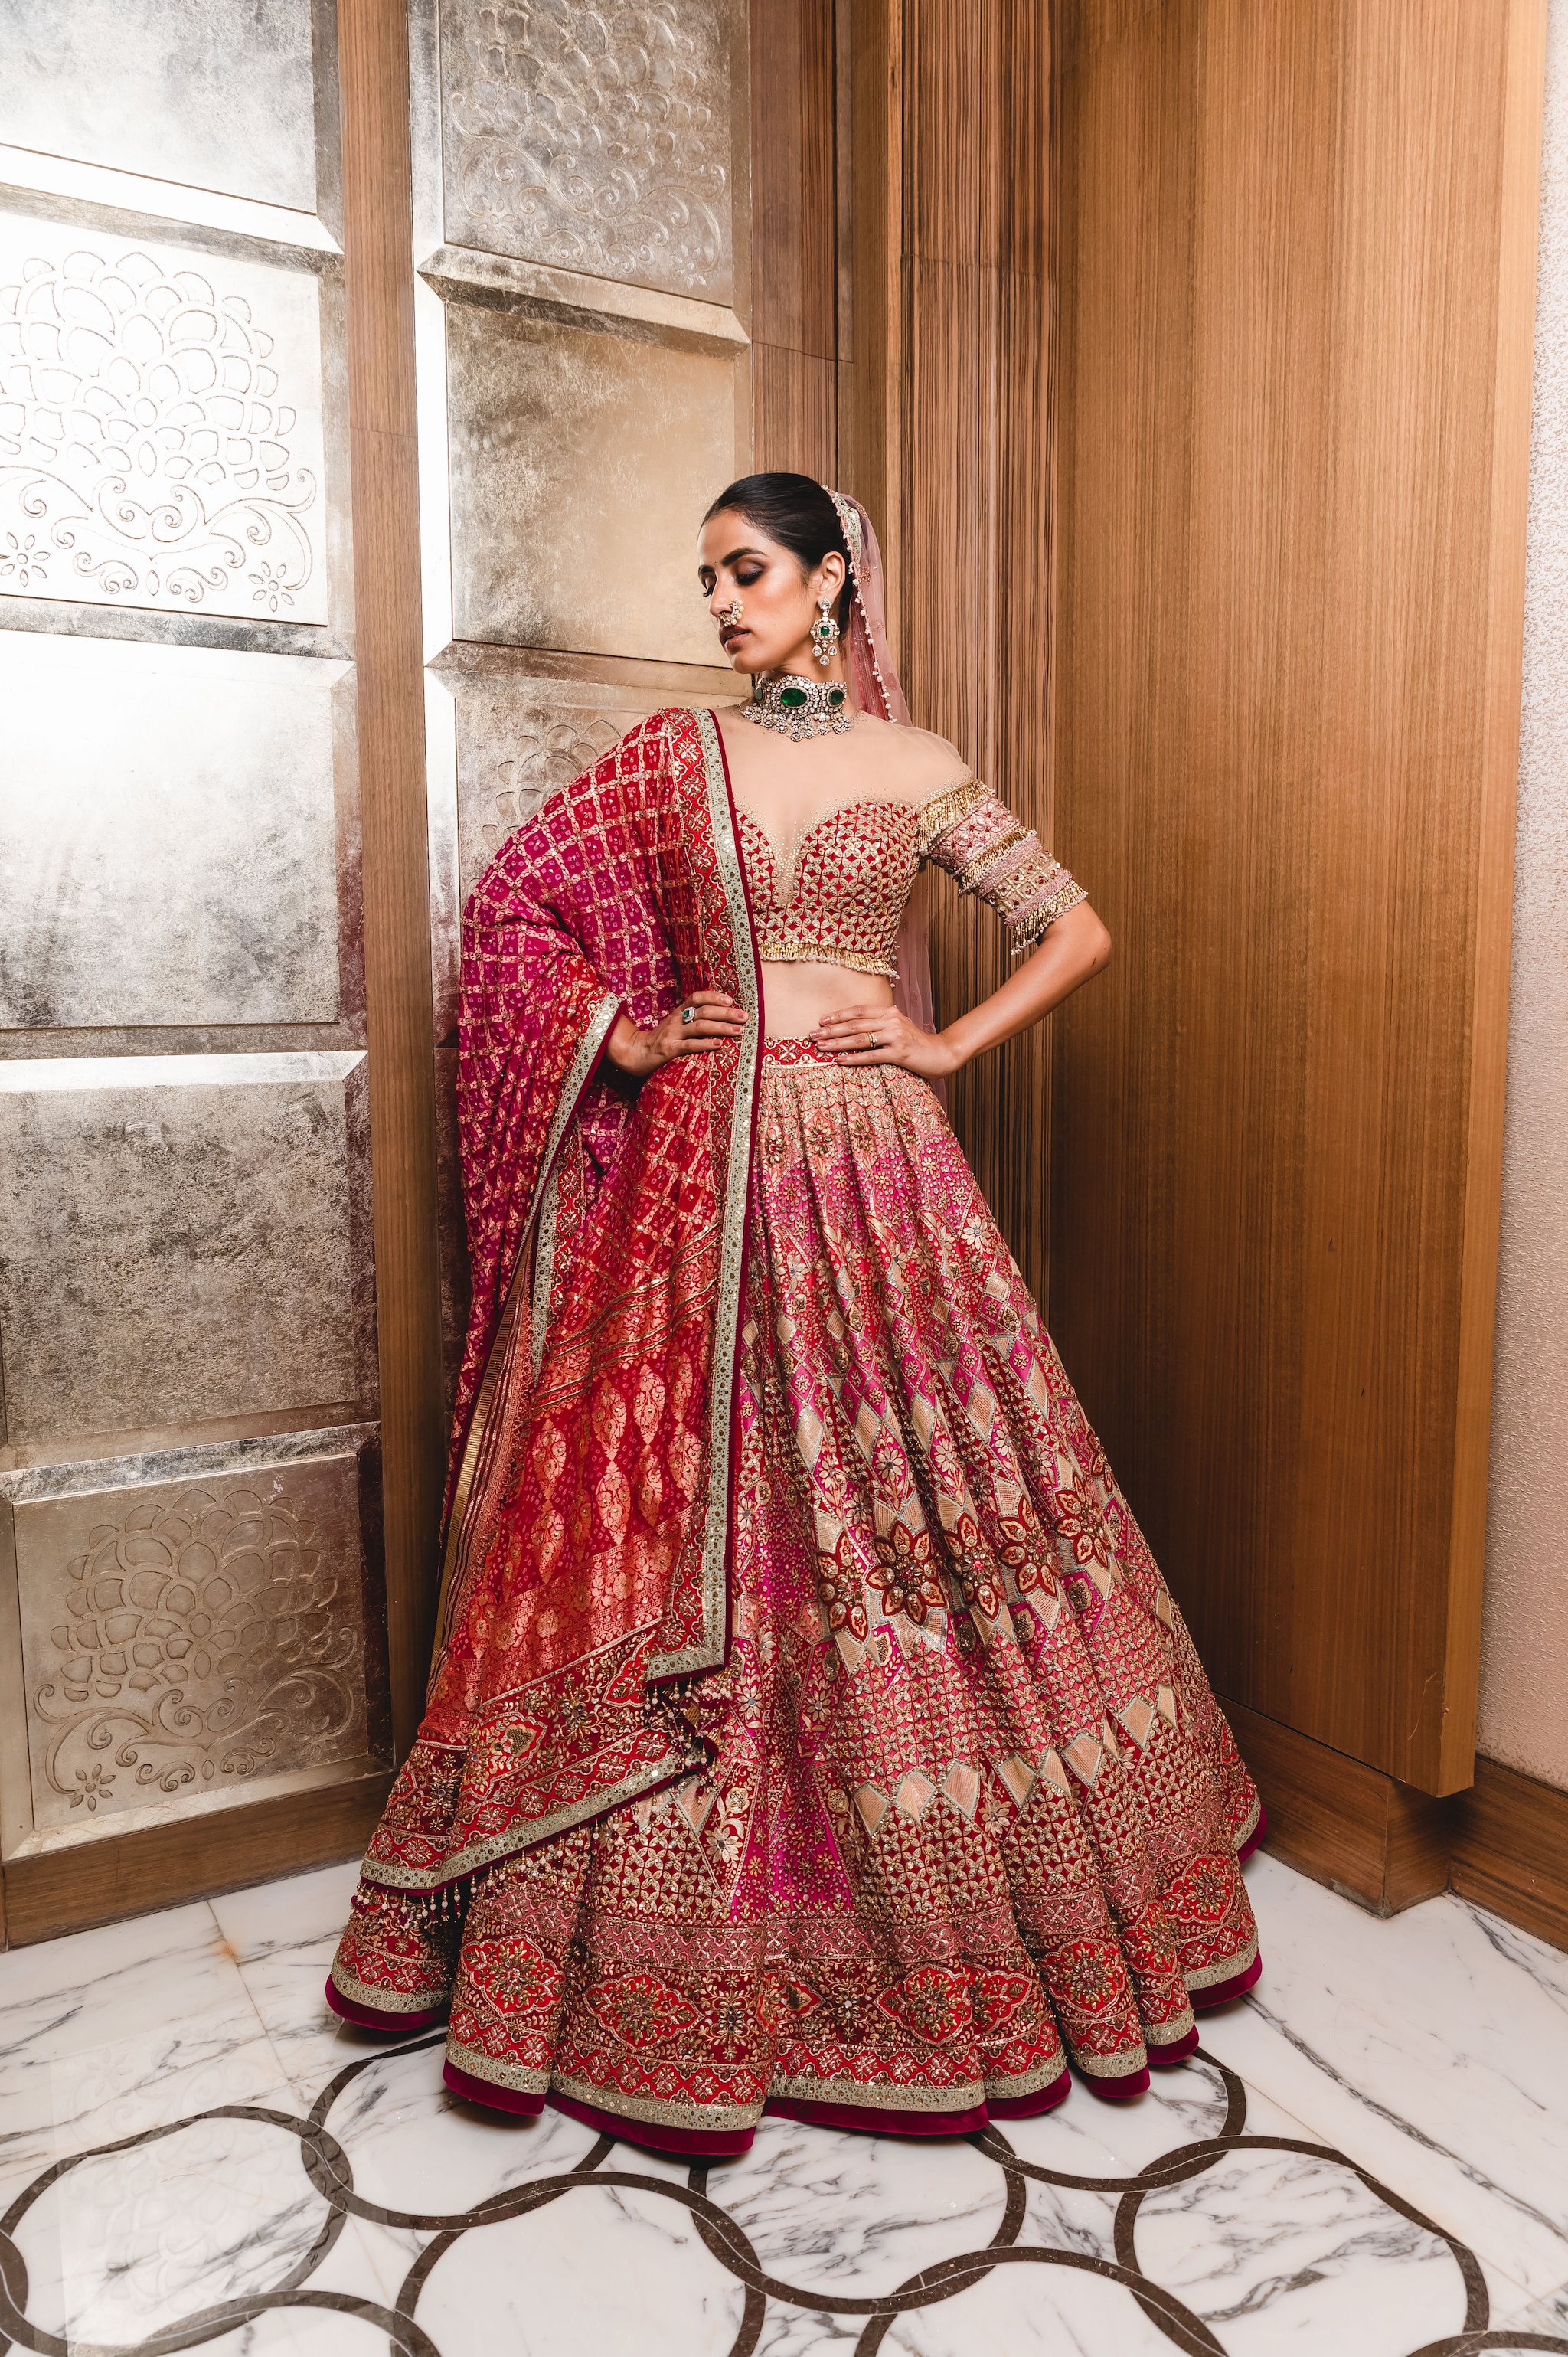 Tarun Tahiliani presented his collection, The Painterly Dream